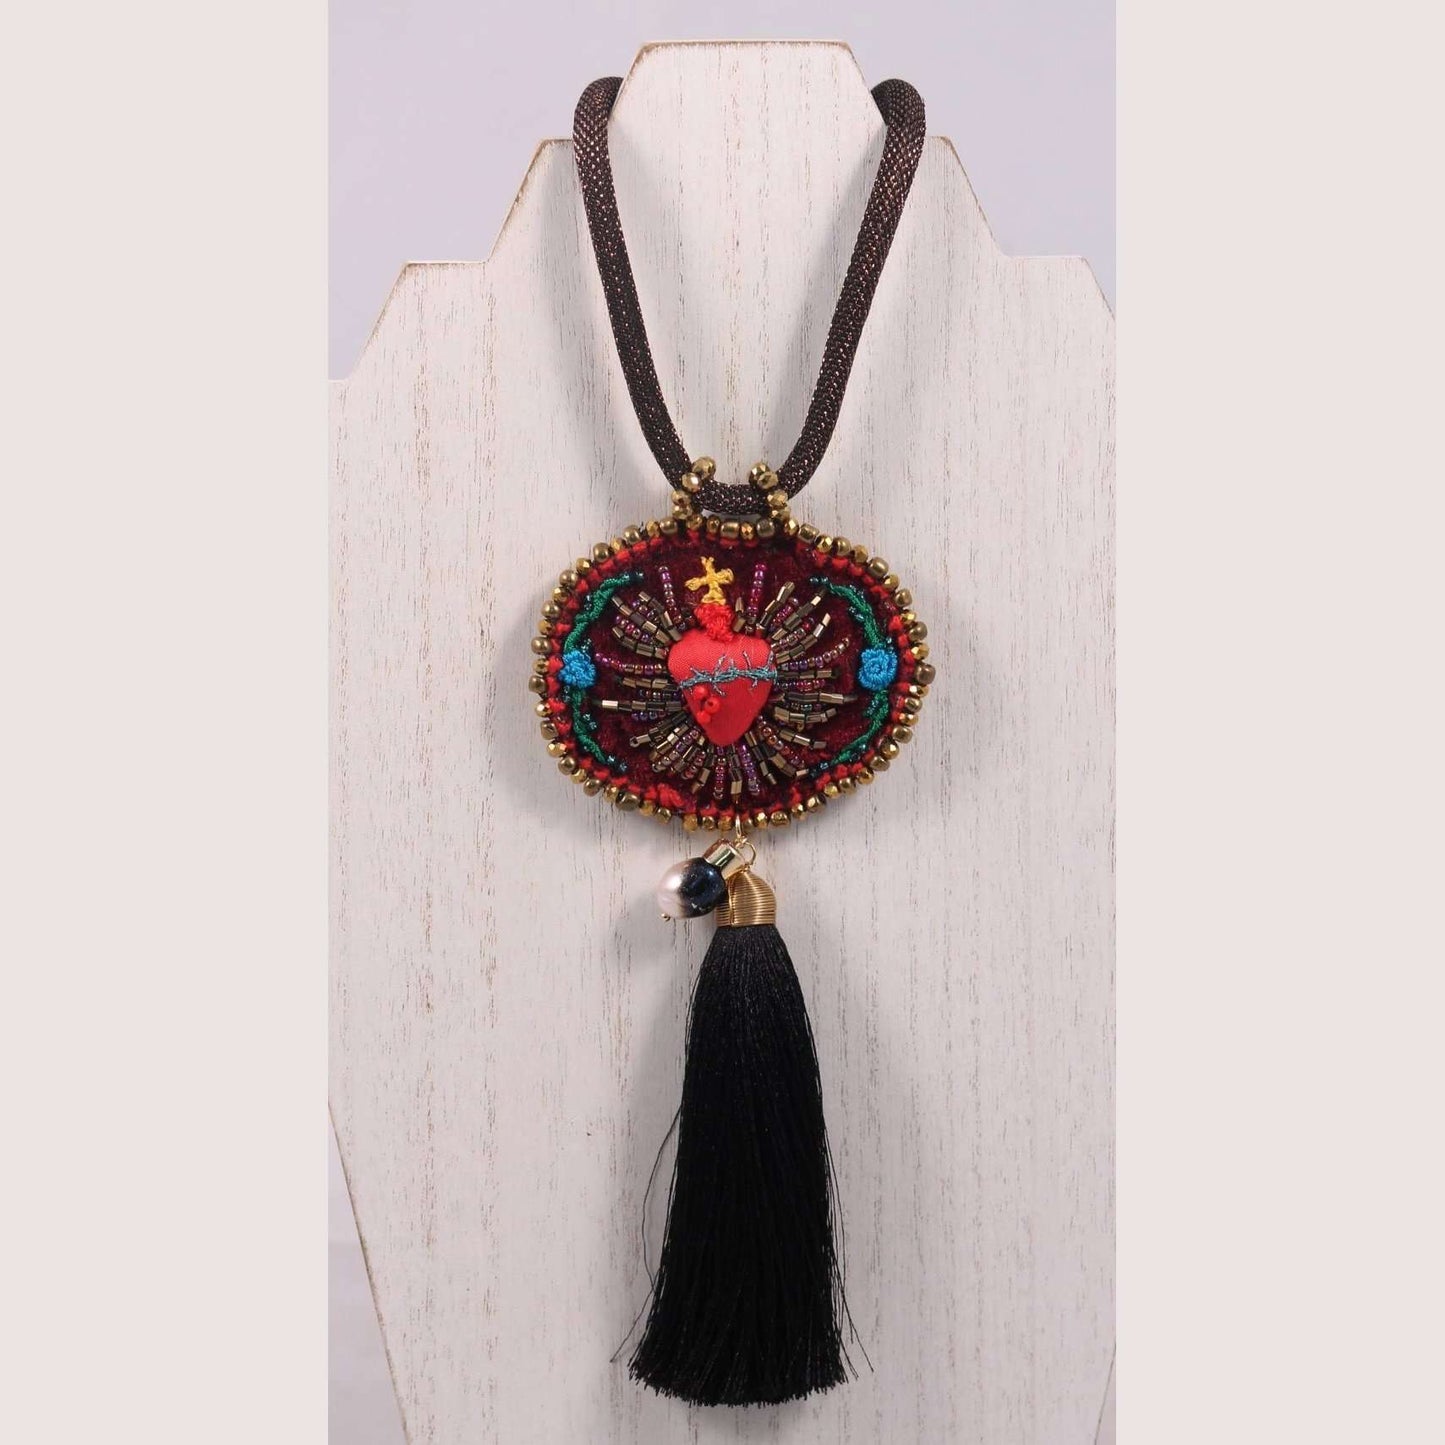 Hand Crafted Heart#1 Necklace Mexican Art Jewelry Black Tassel